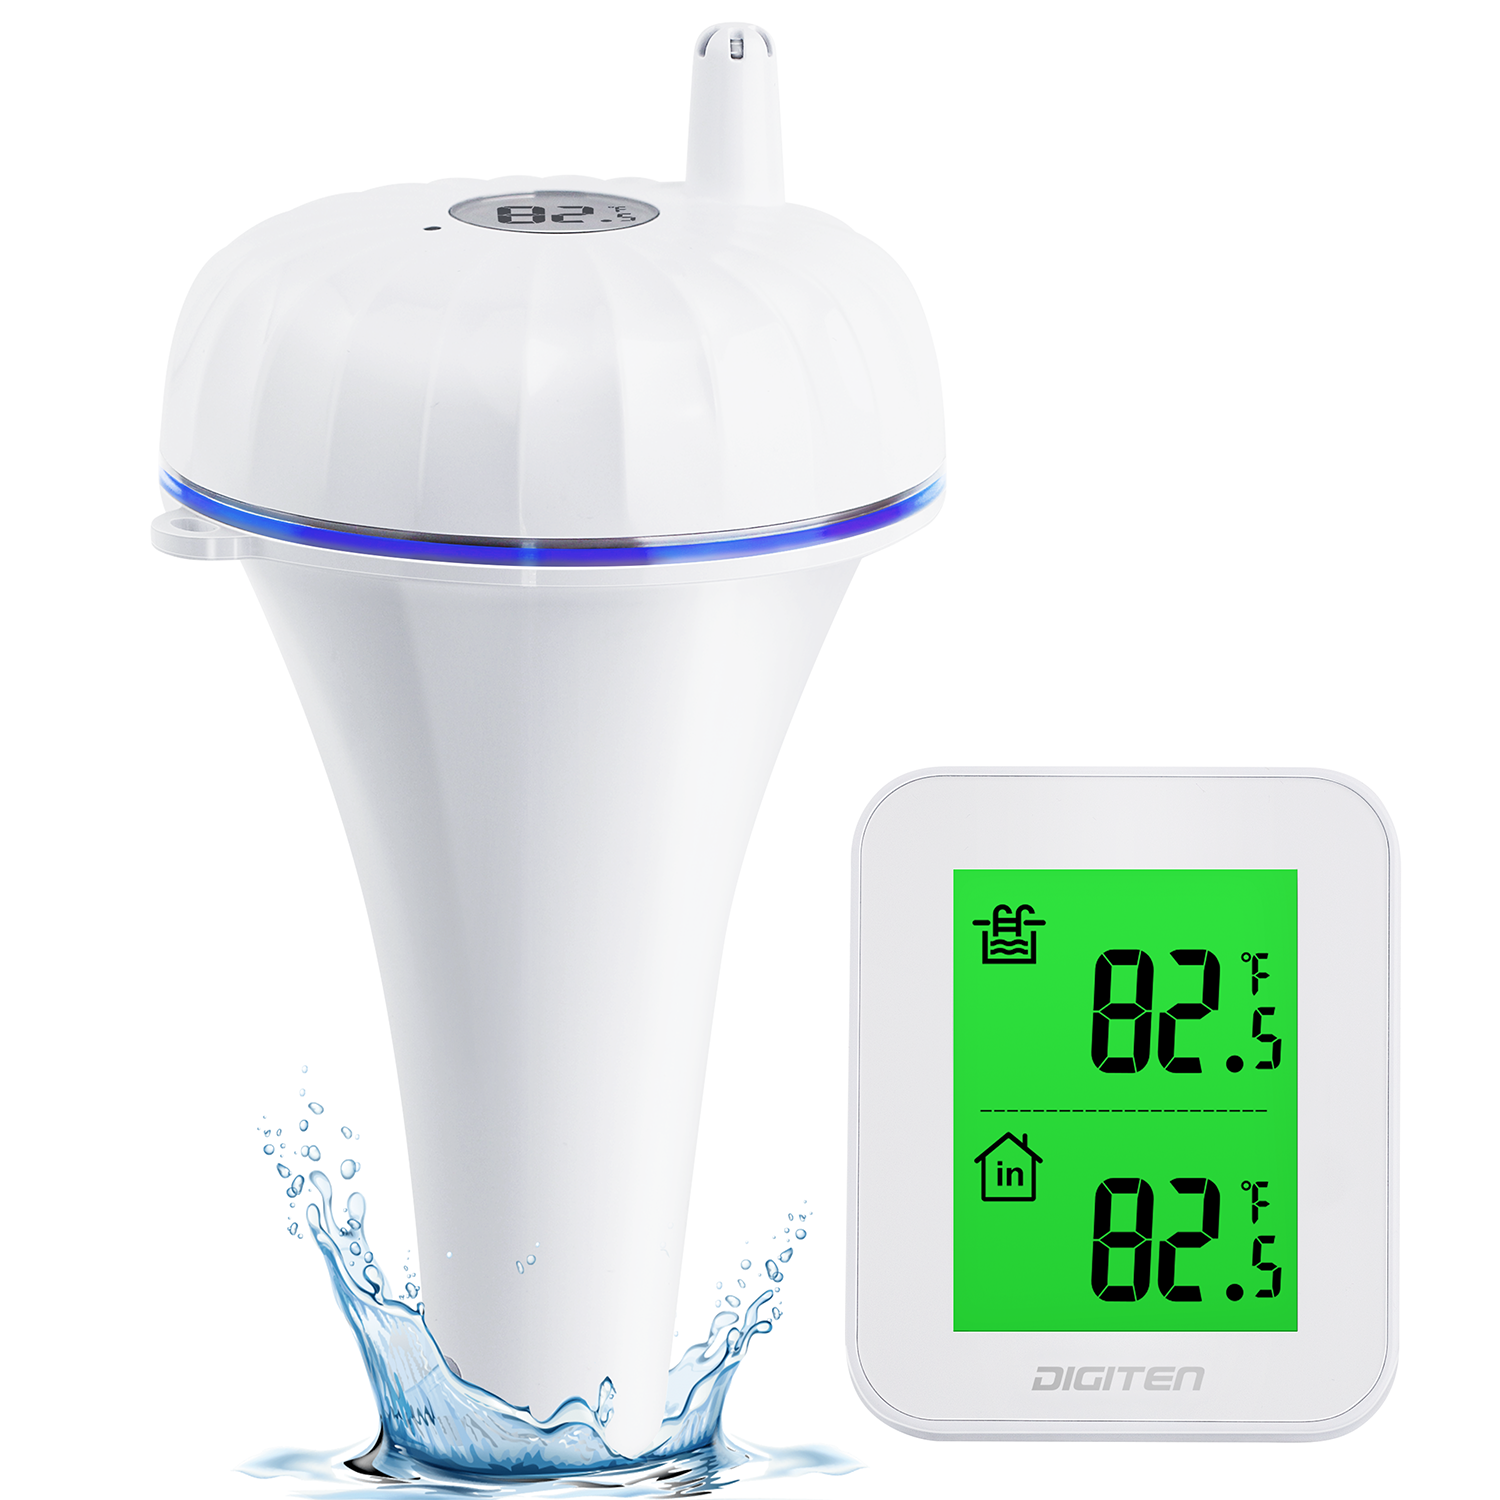 Thermometer Wifi